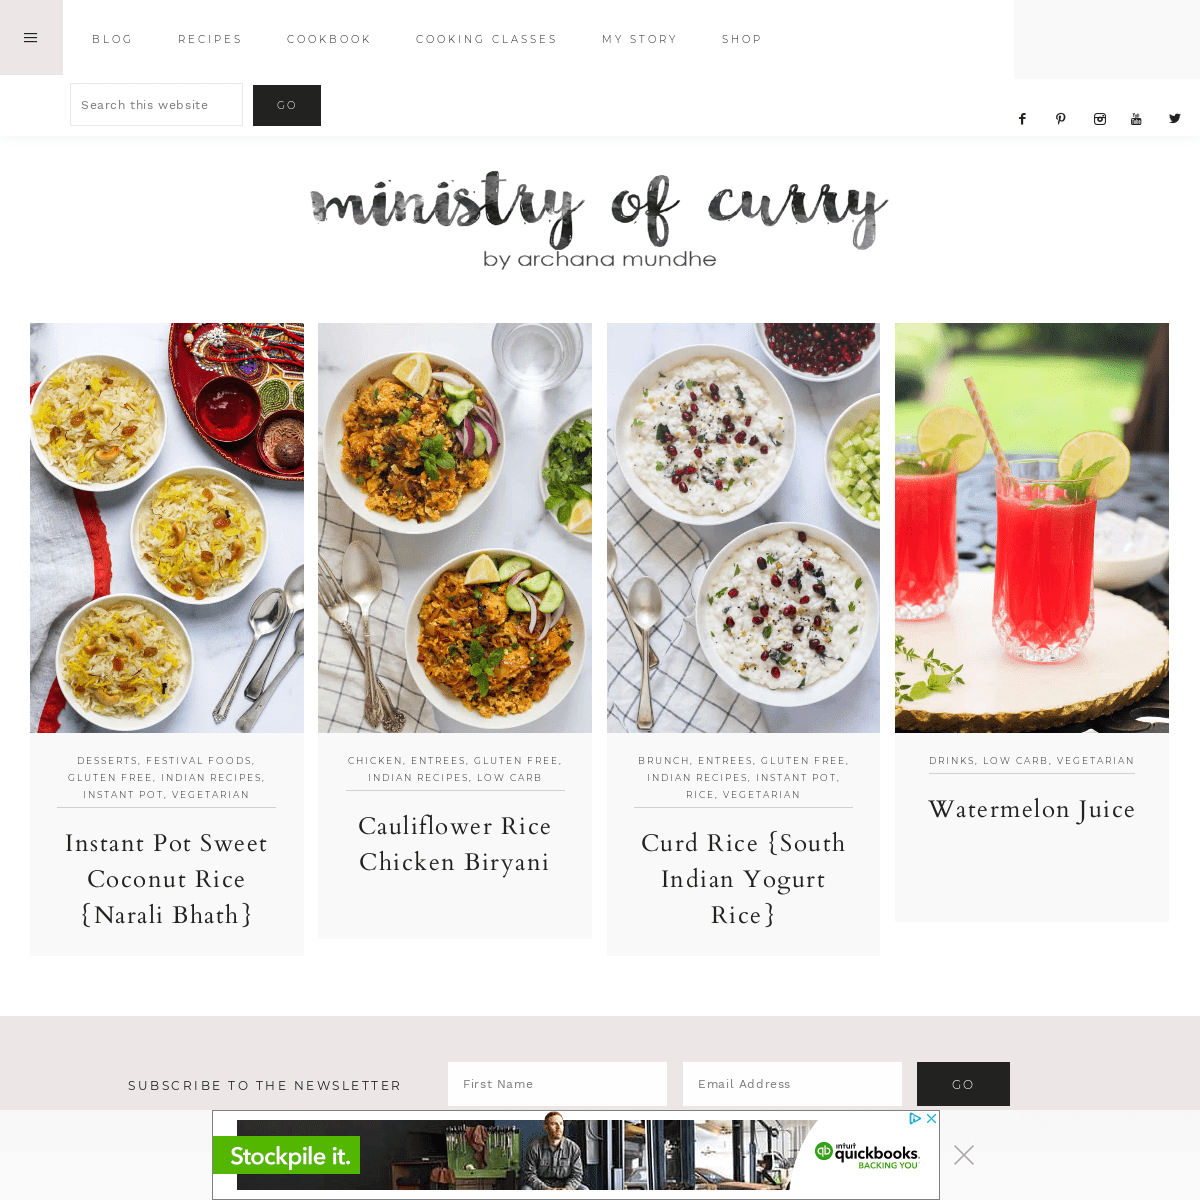 Indian Recipes & International Cuisine with Step-by-Step Instructions - Ministry of Curry